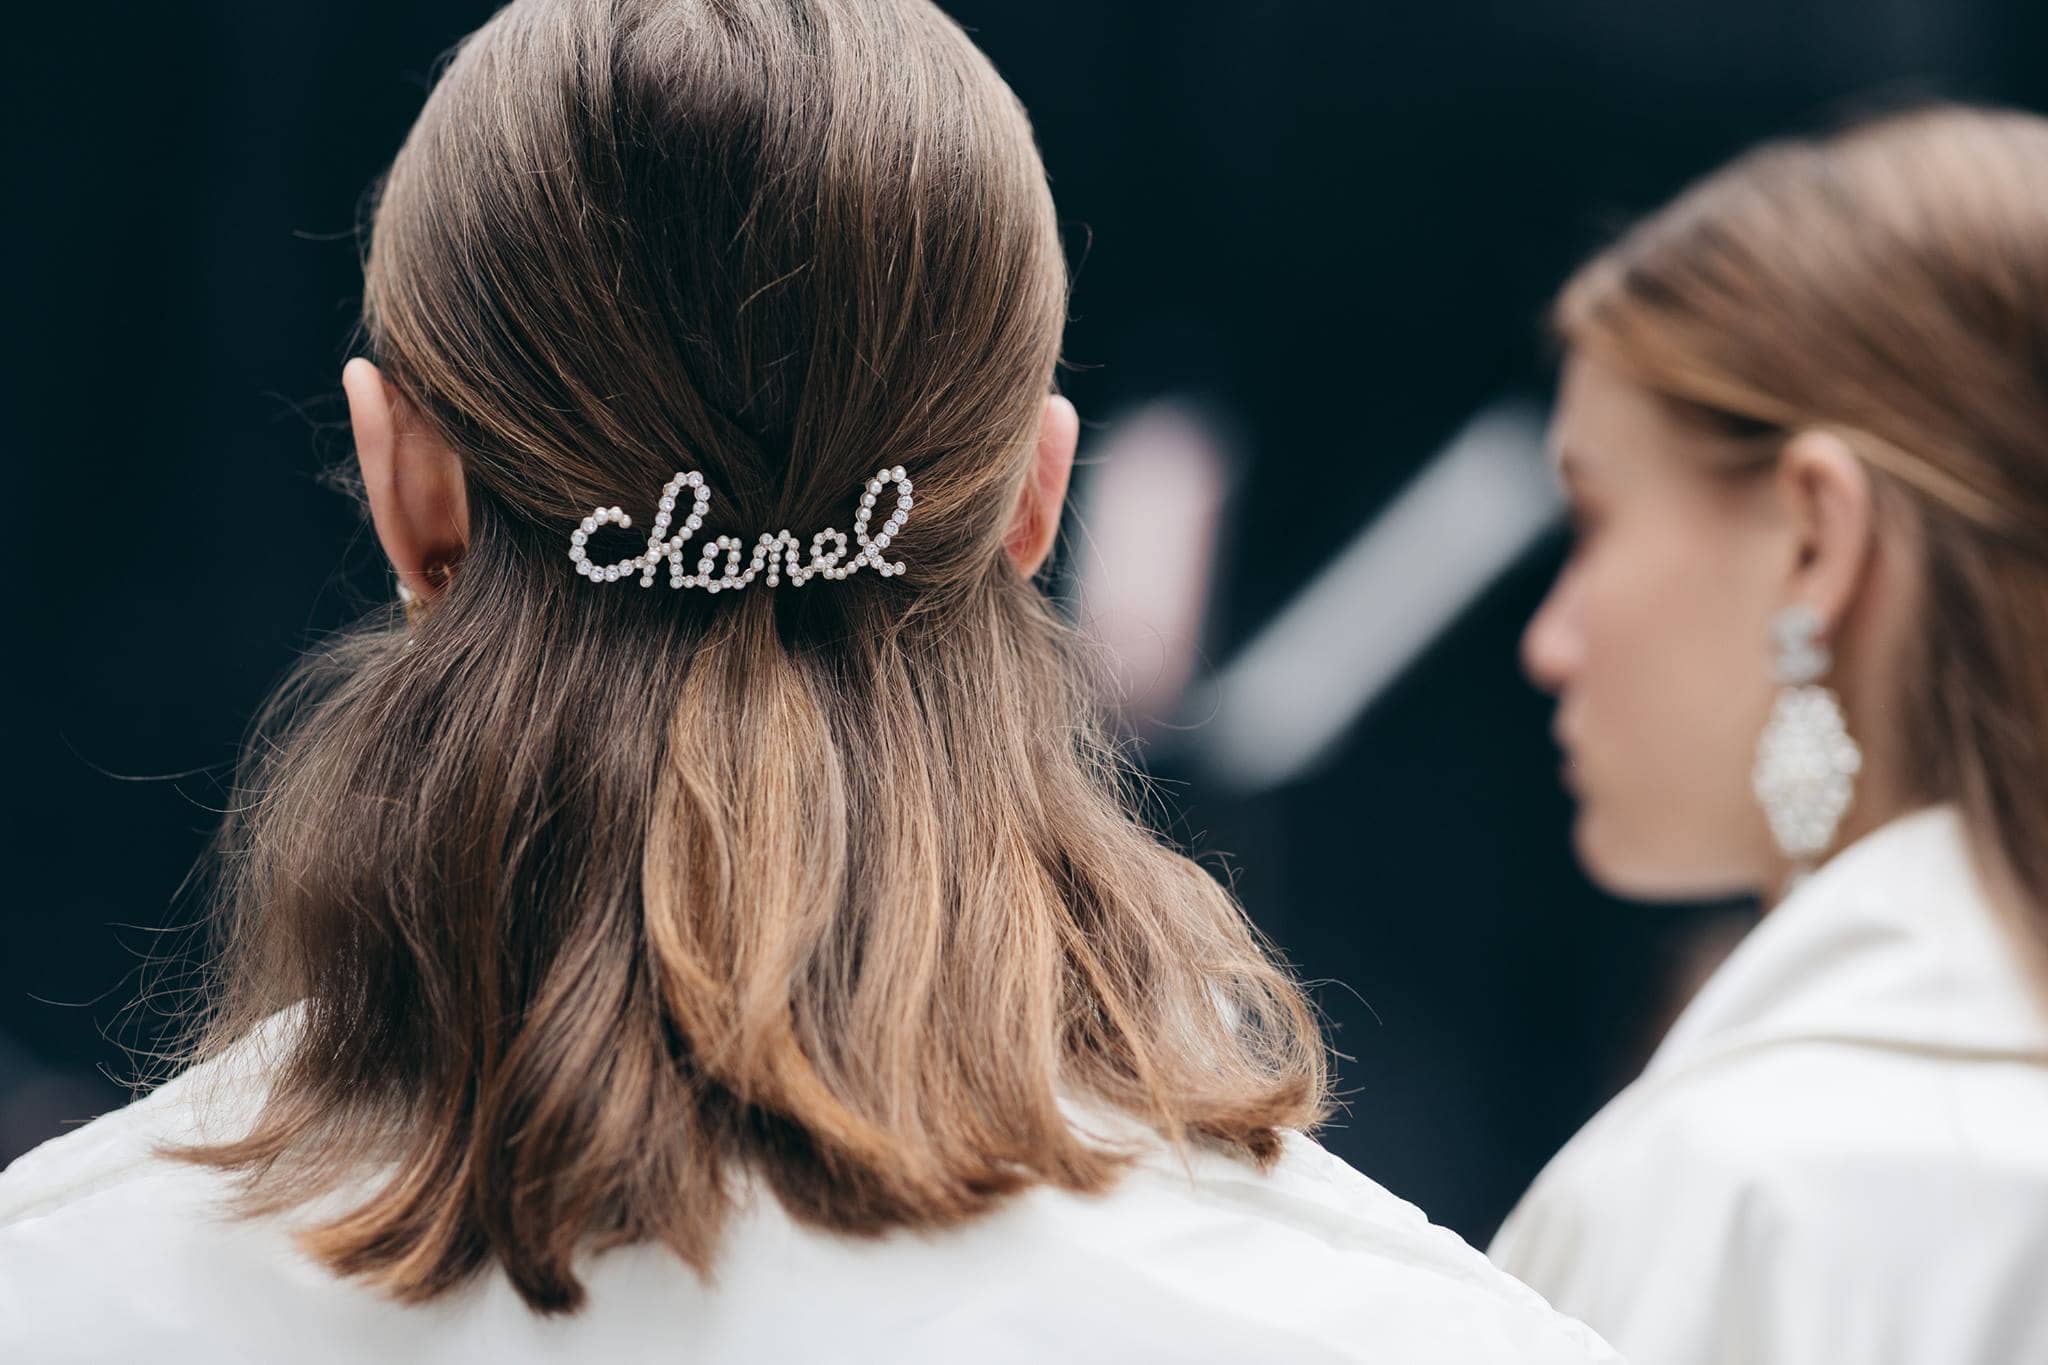 Trend to try: 90s hair clips are not meant to just keep your hair in place